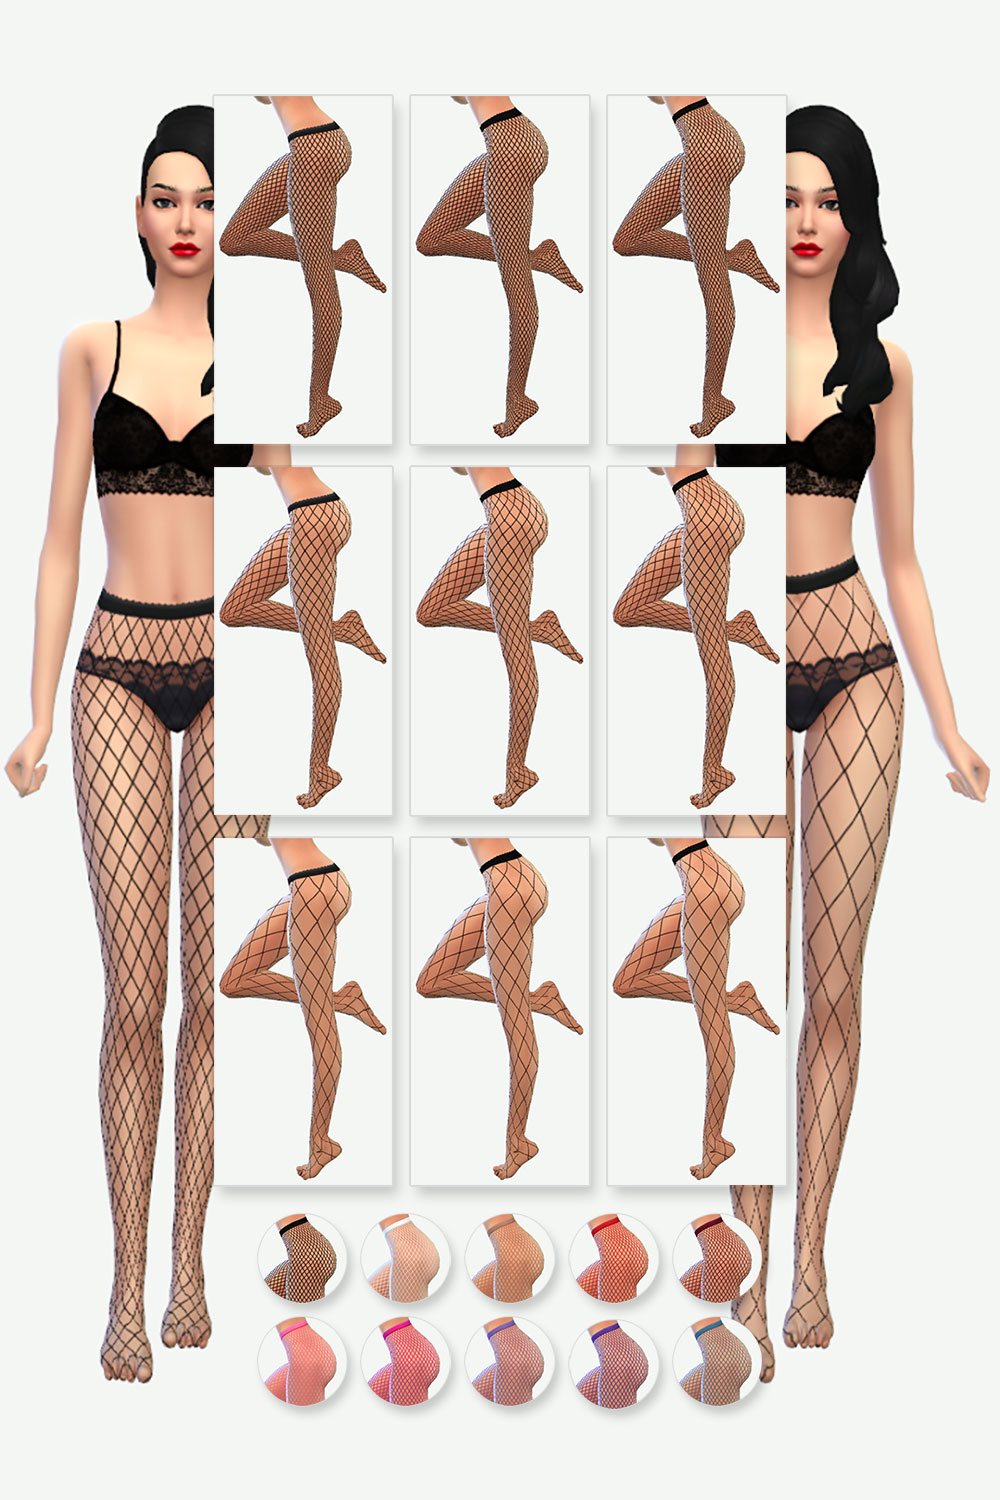 The Sims 4 Fishnet Tights